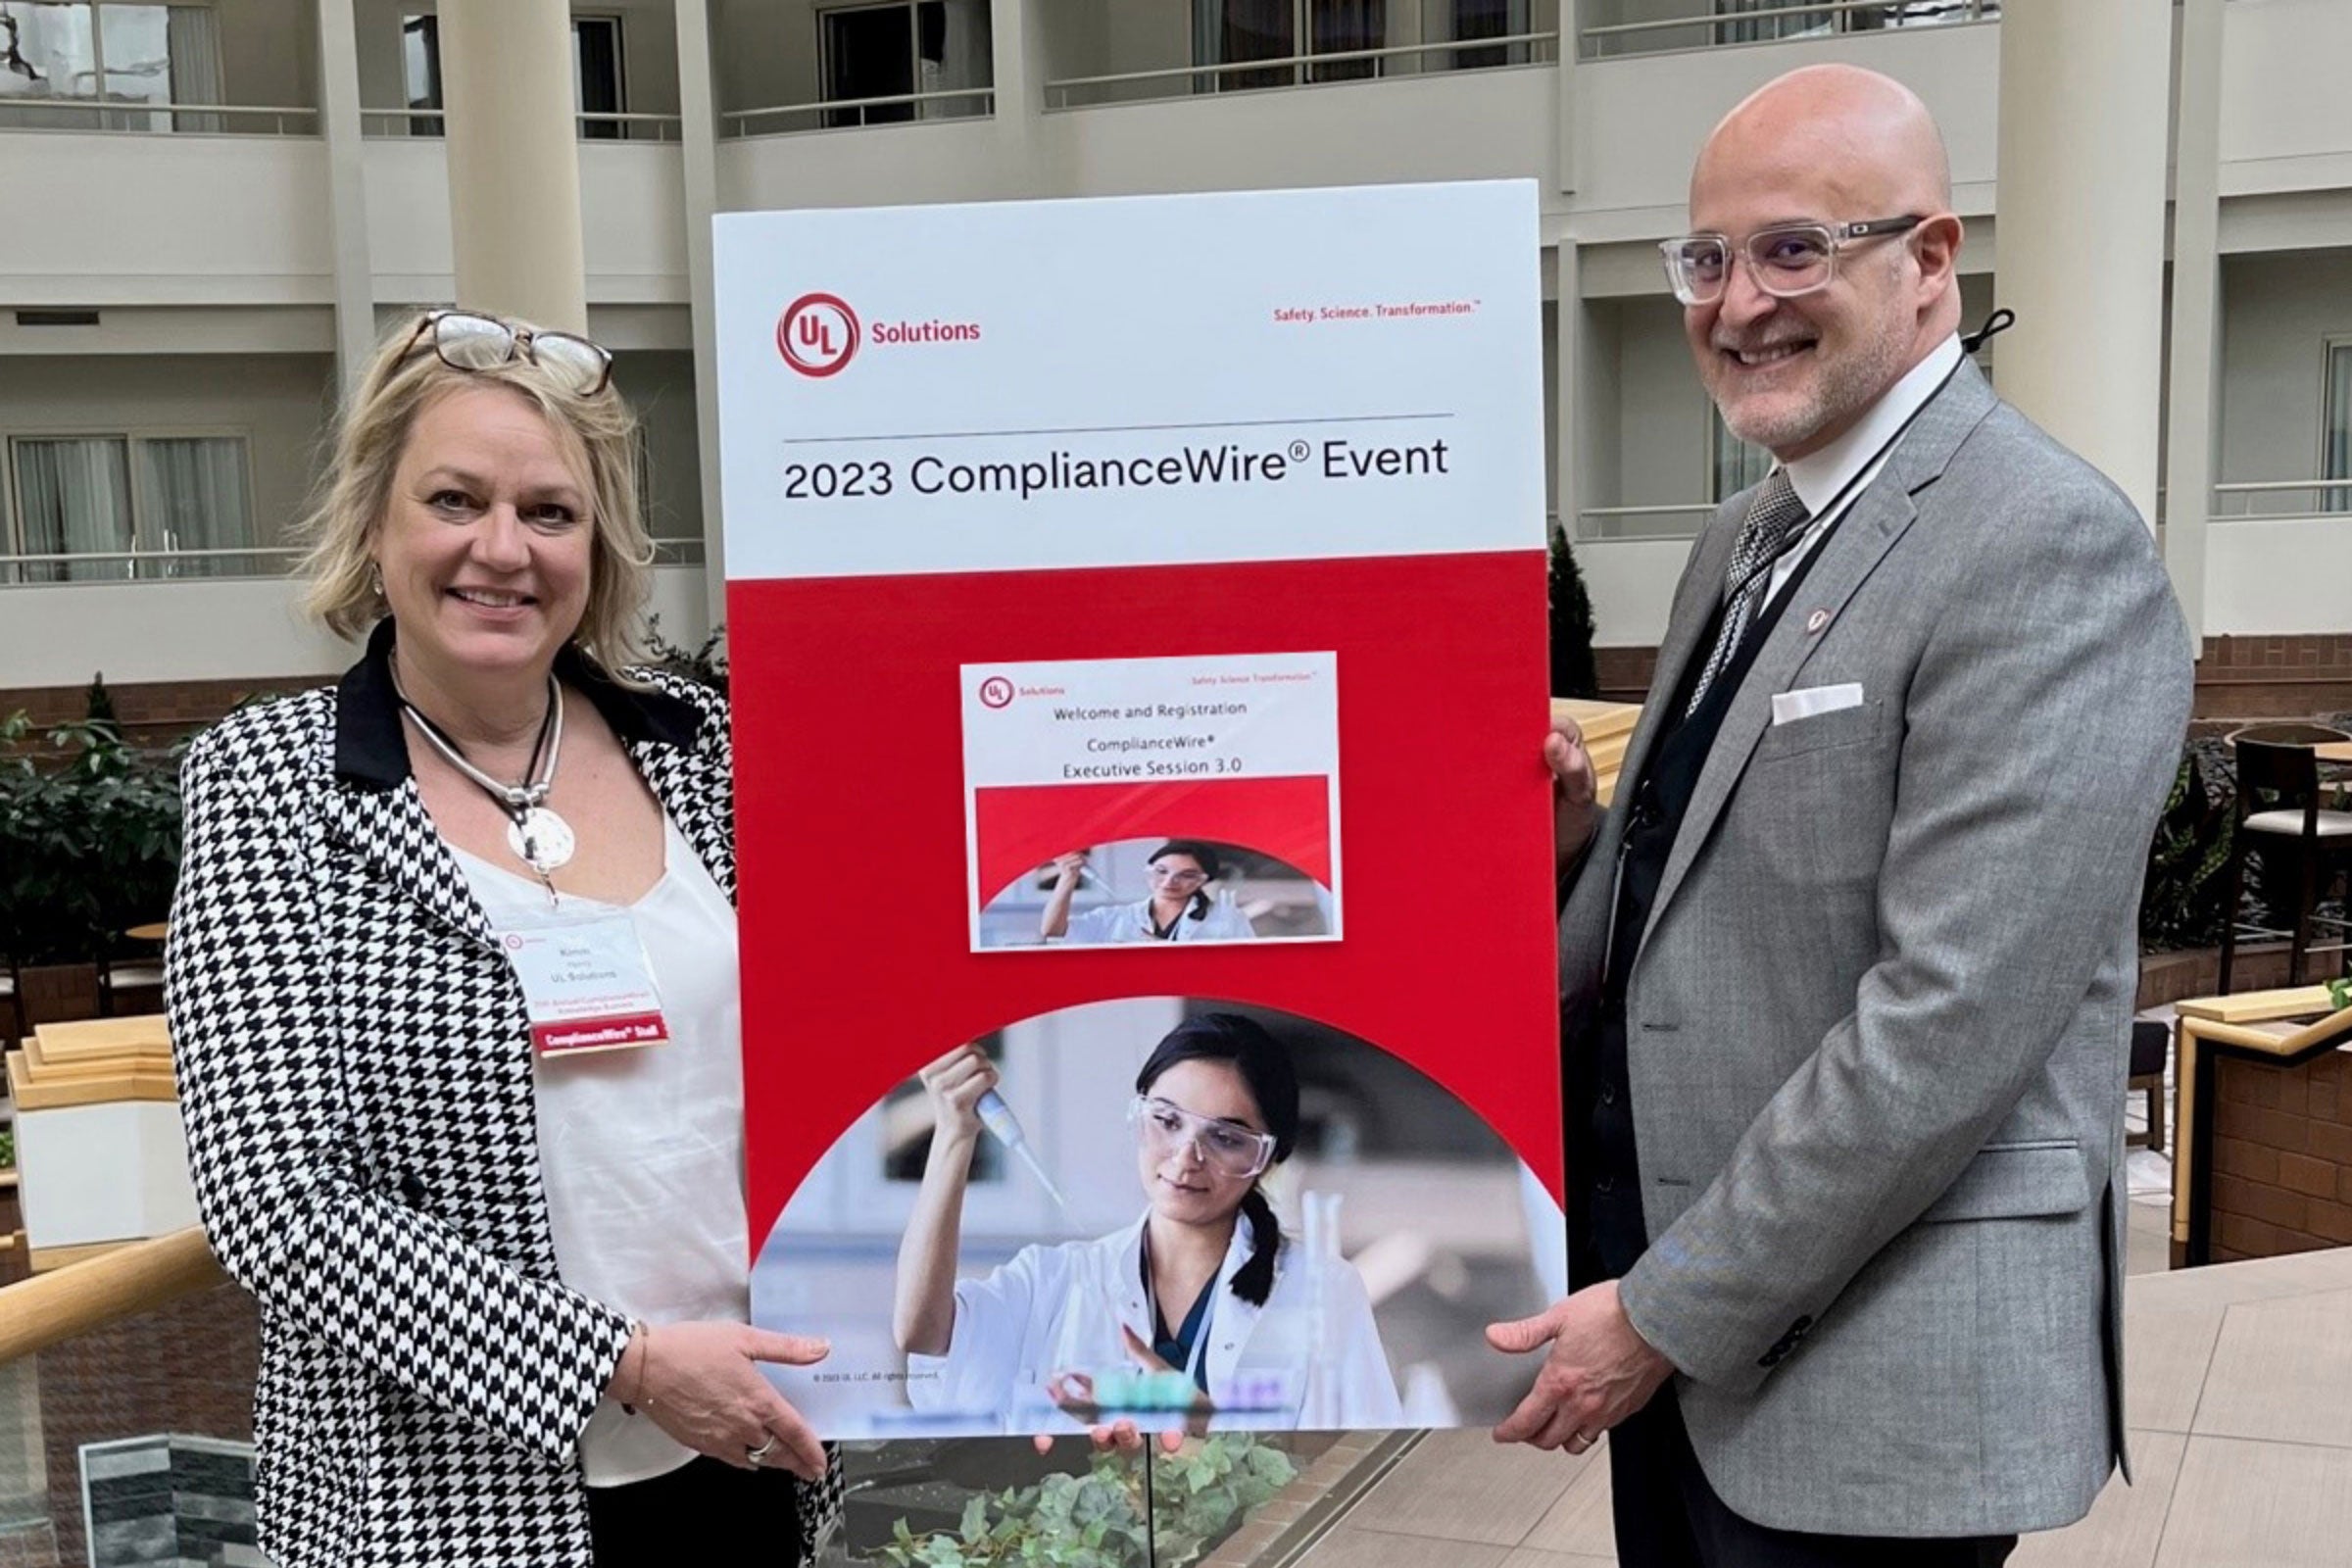 Kimm Henry, UL Solutions Demand Generation & Global Campaigns, with Kenneth Perez, UL Solutions ComplianceWire® event marketing team at the 20th Annual UL Solutions ComplianceWire® Knowledge Summit